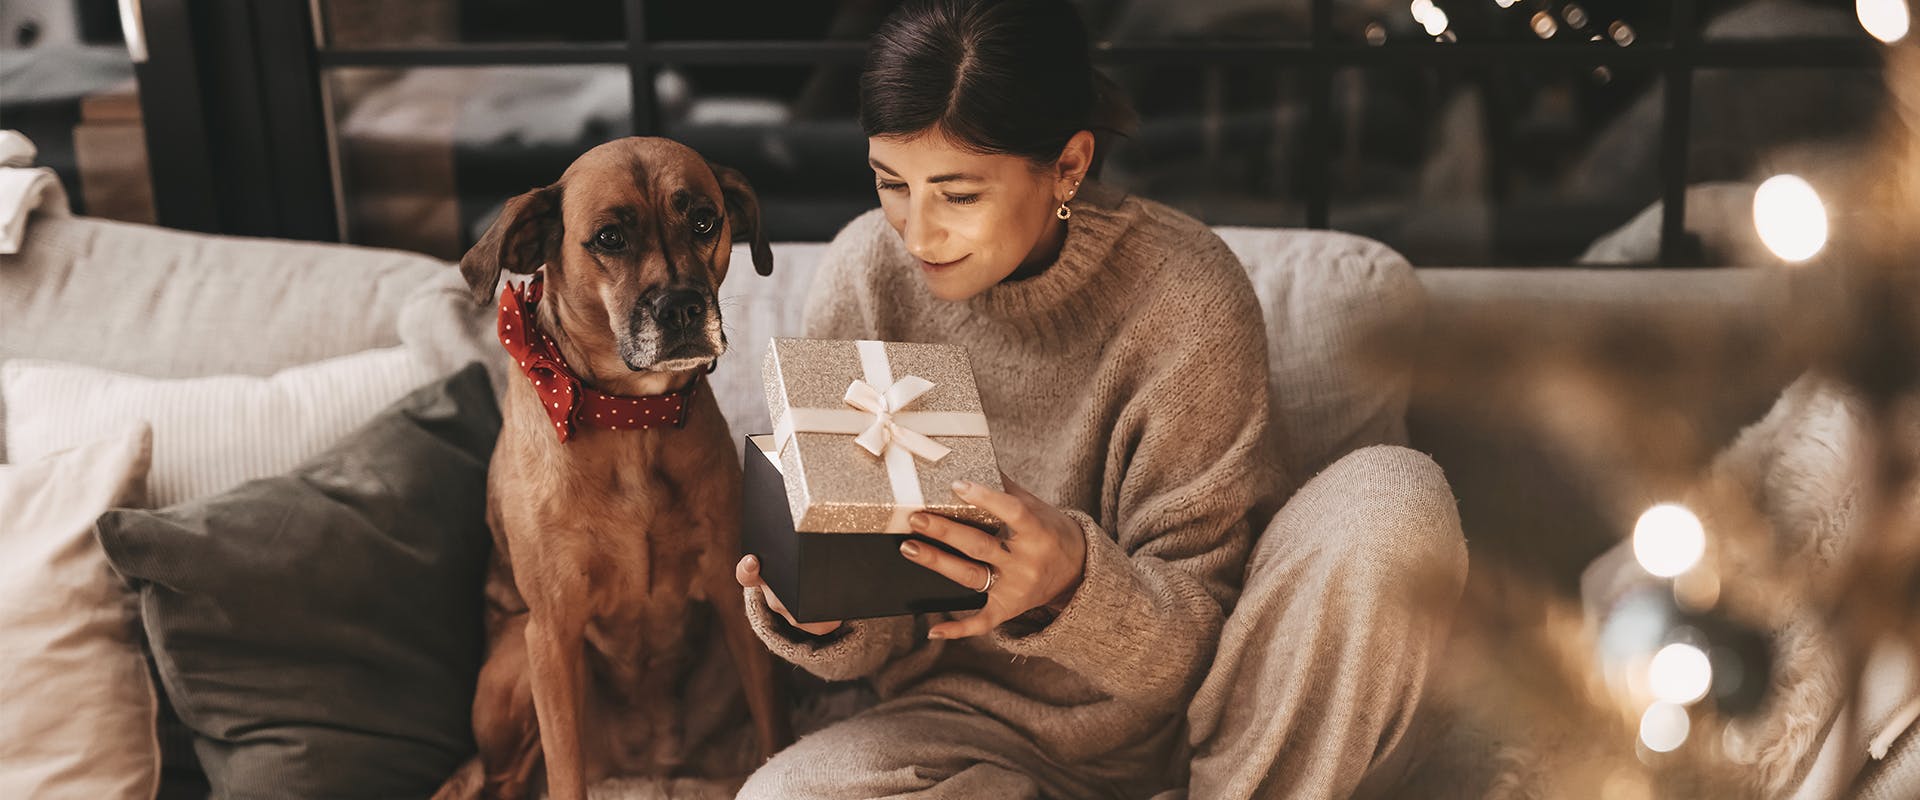 A woman opening a present while sitting on the sofa next to a dog